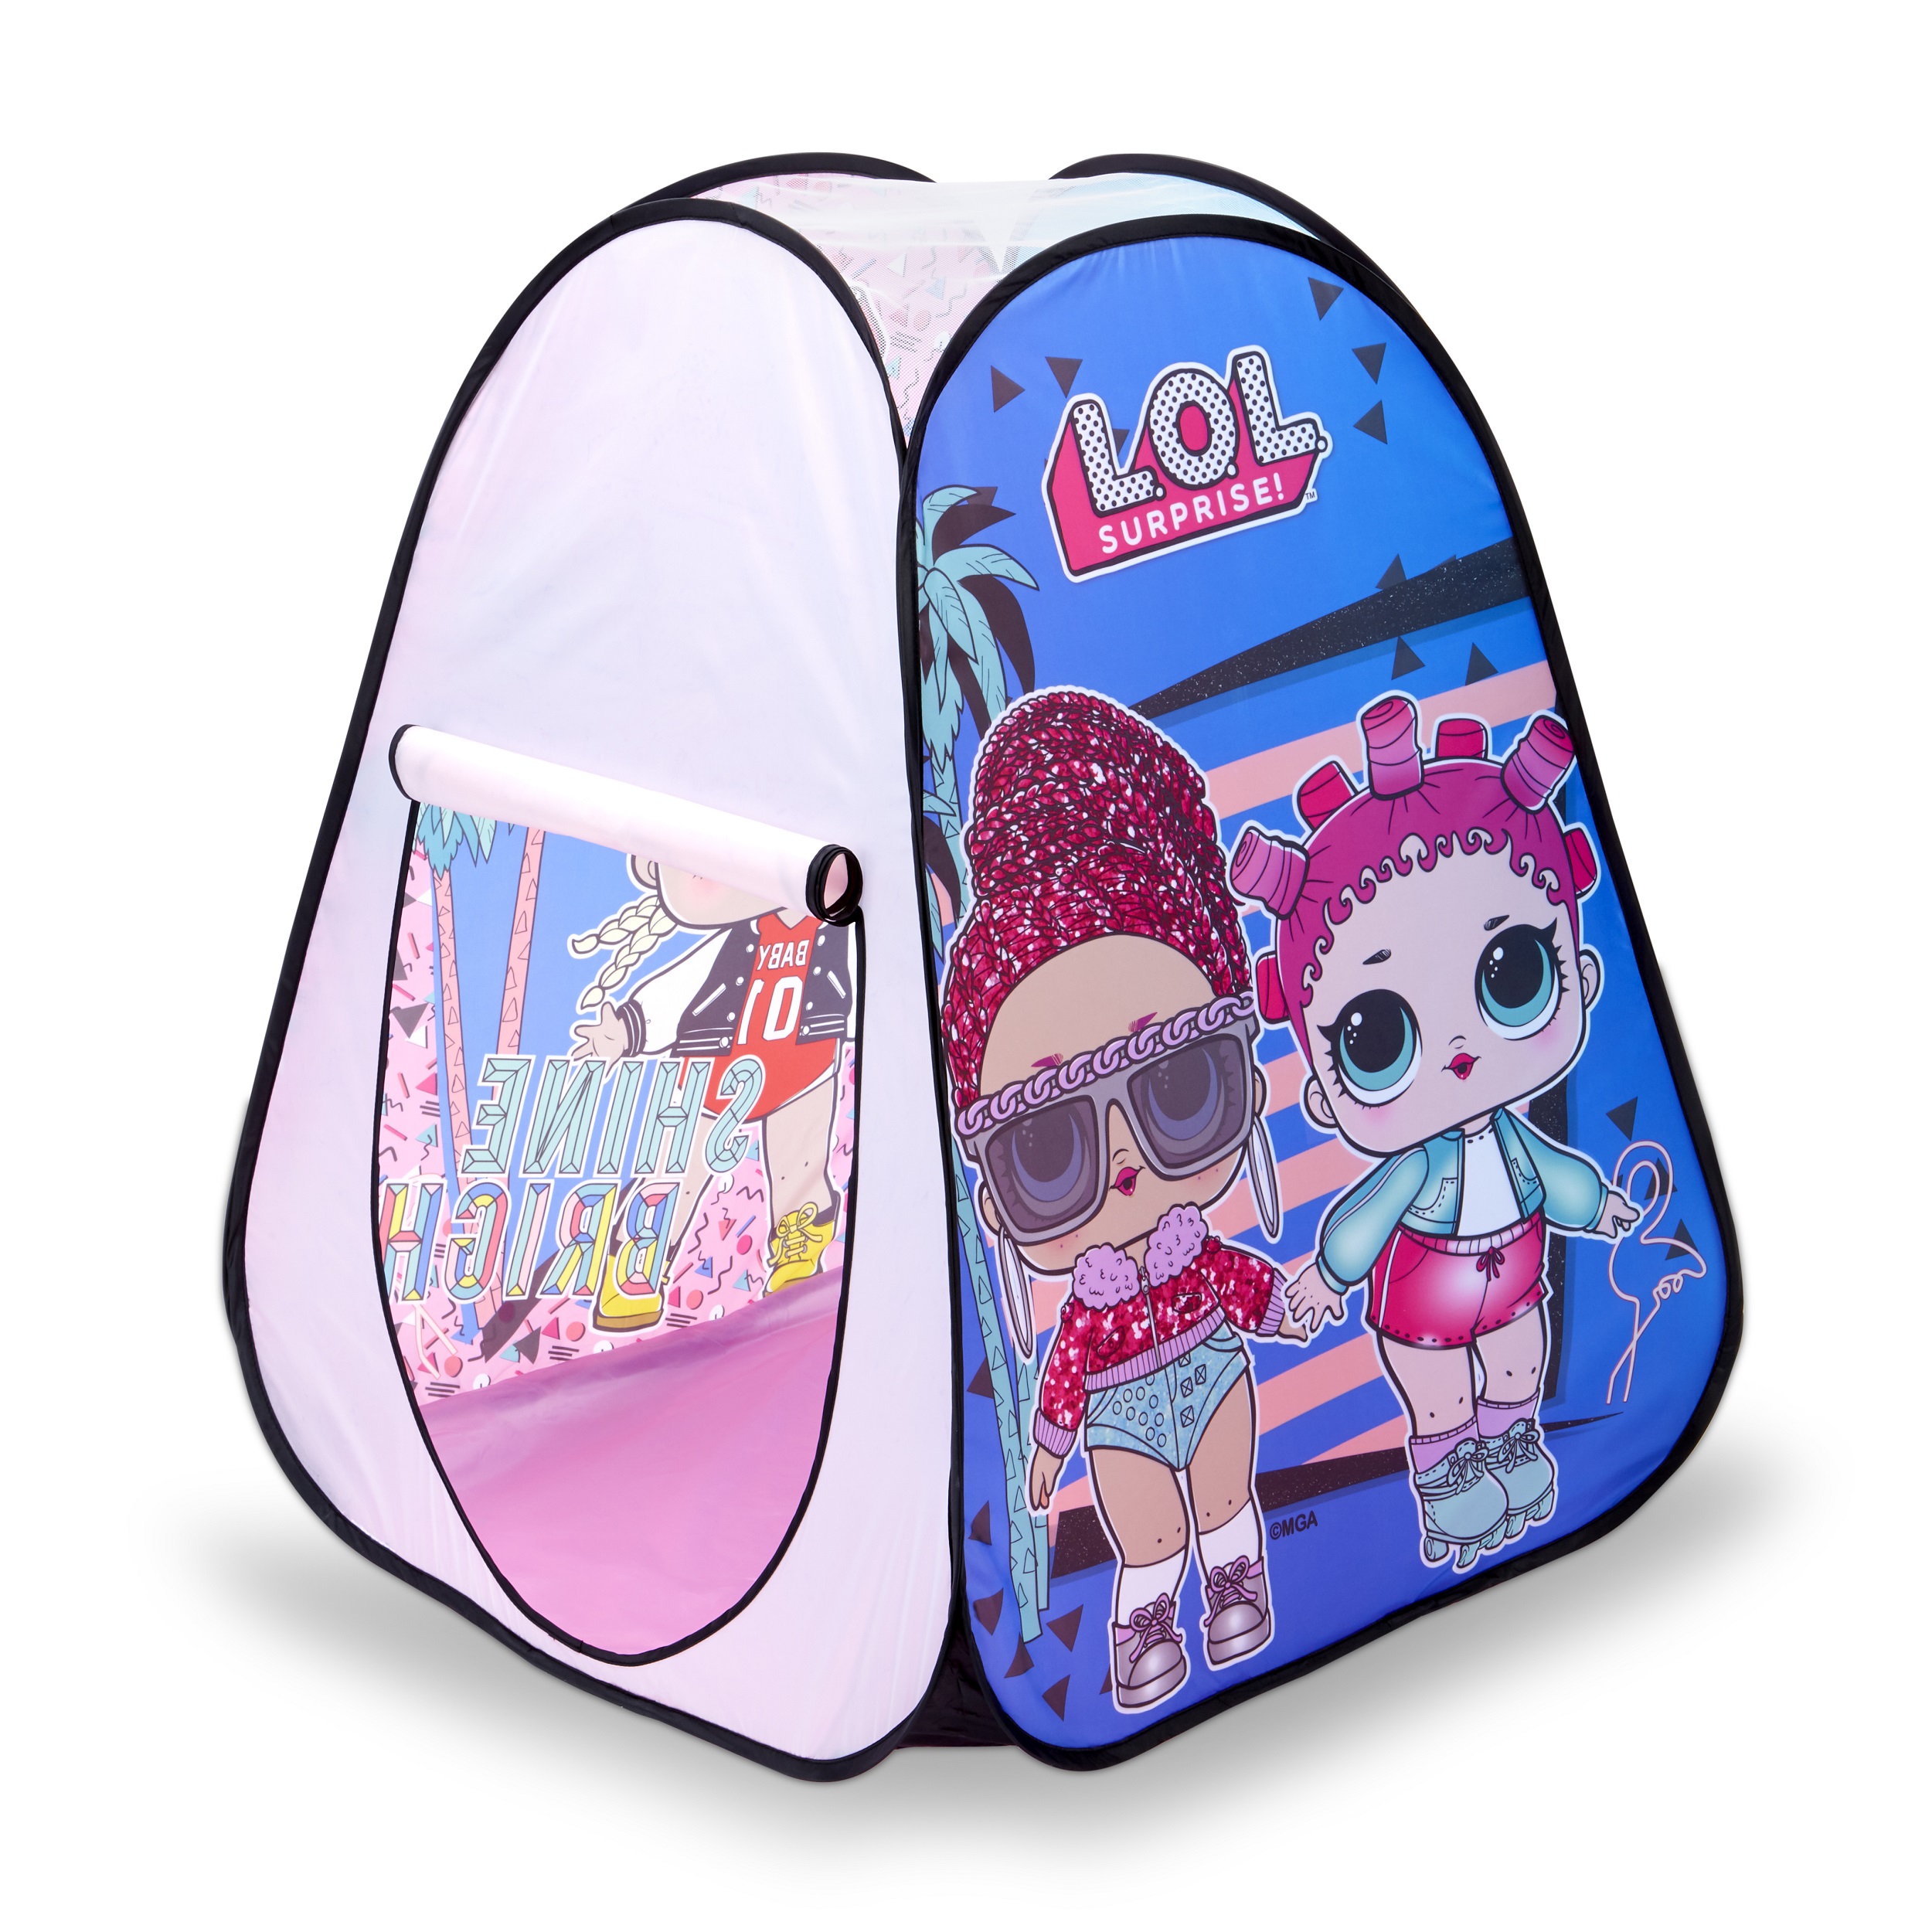 LOL Surprise Indoor/Outdoor Pop-Up Play Tent With Fold-Up Door, Great Gift for Kids Ages 4 5 6+ - image 1 of 6